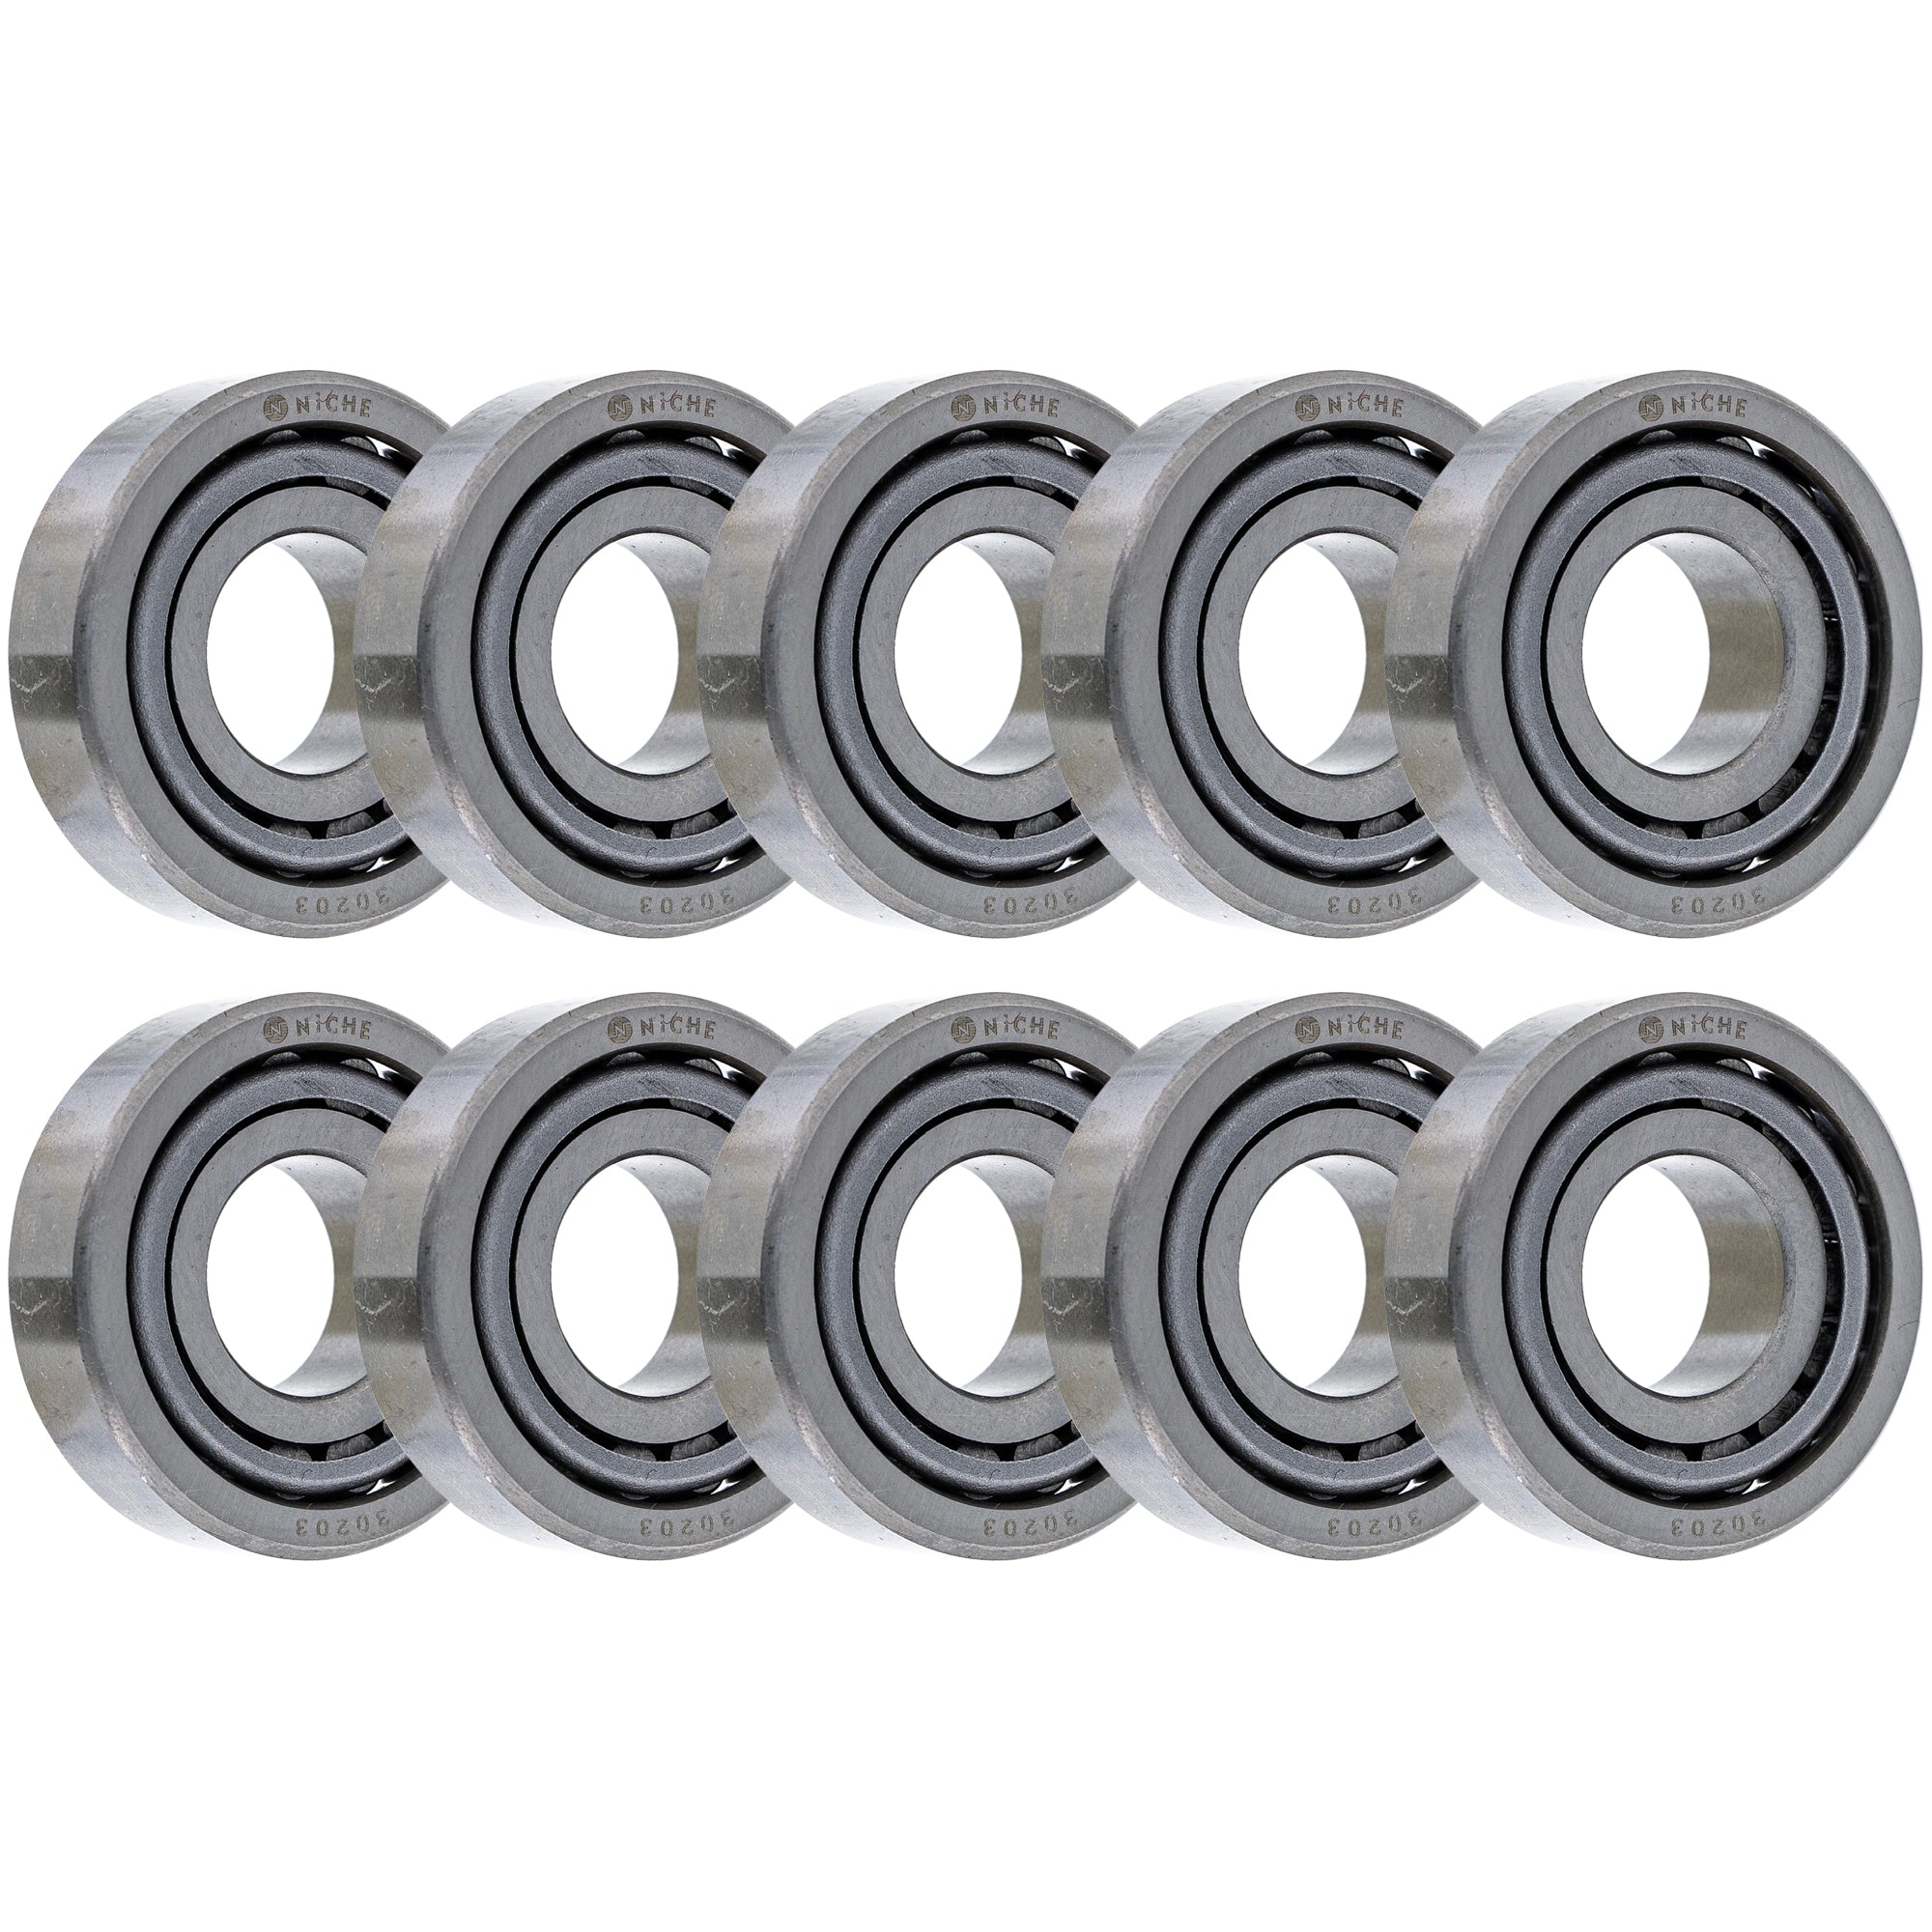 Tapered Roller Bearing Pack of 10 10-Pack for zOTHER R90S R90 R80ST R80RT NICHE 519-CBB2323R